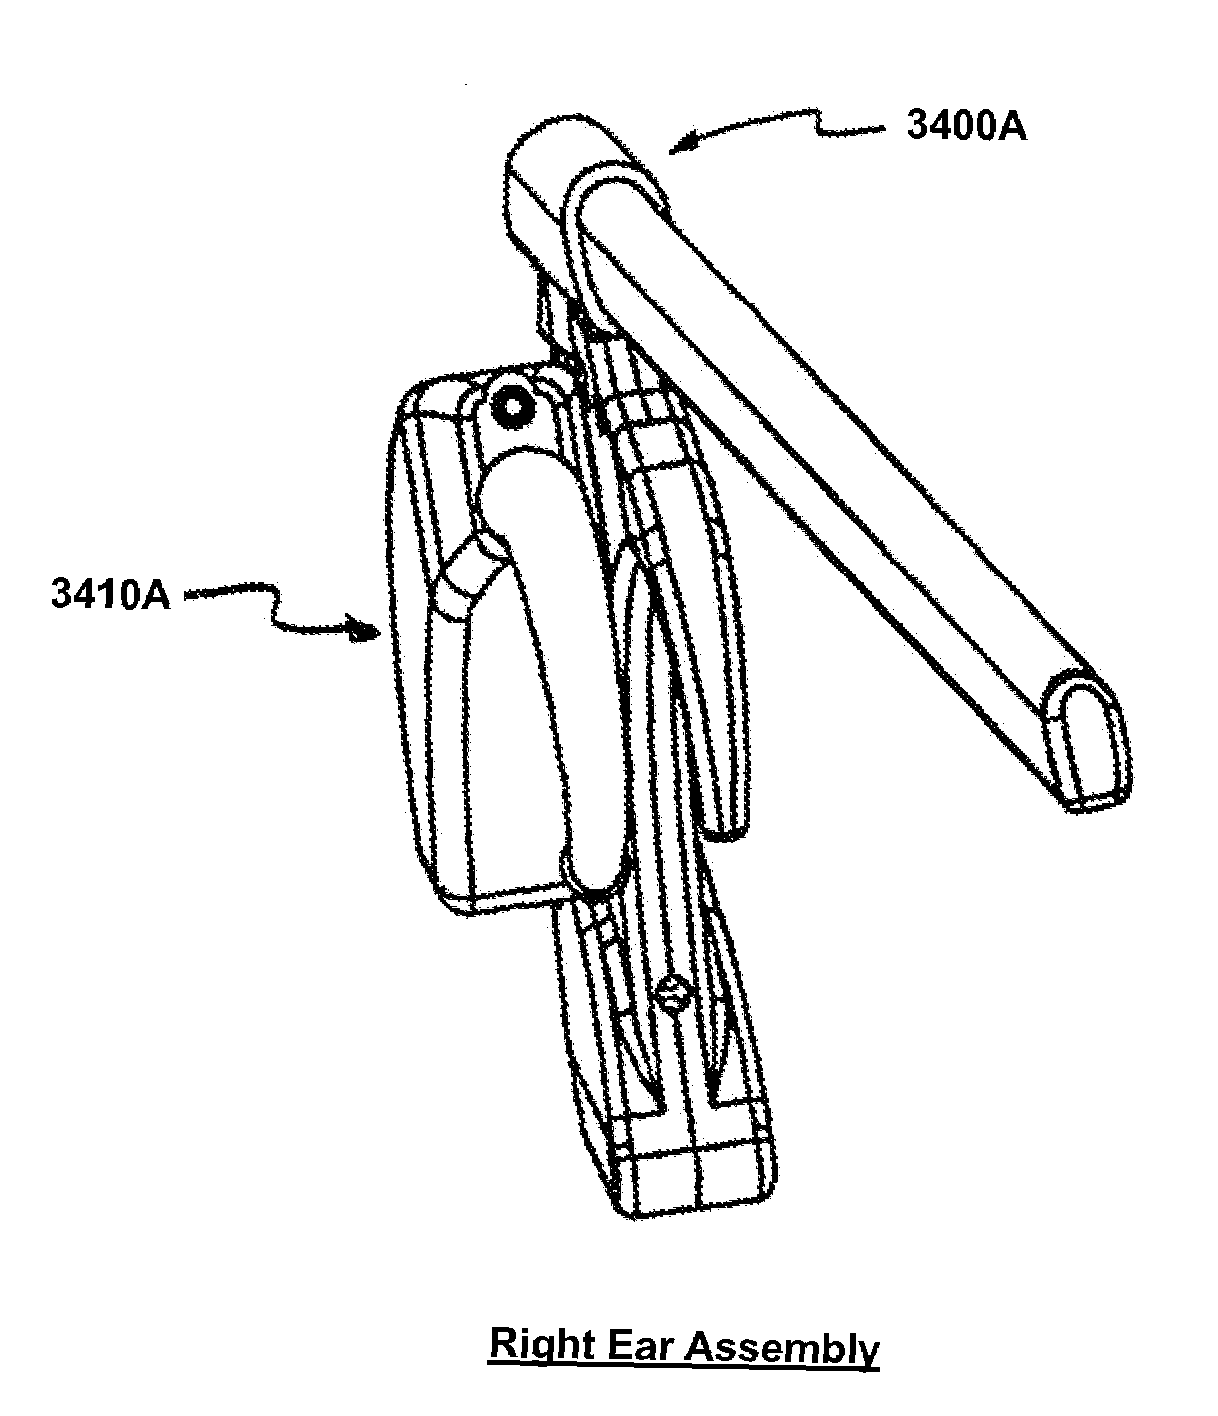 Multi-coil coupling system for hearing aid applications